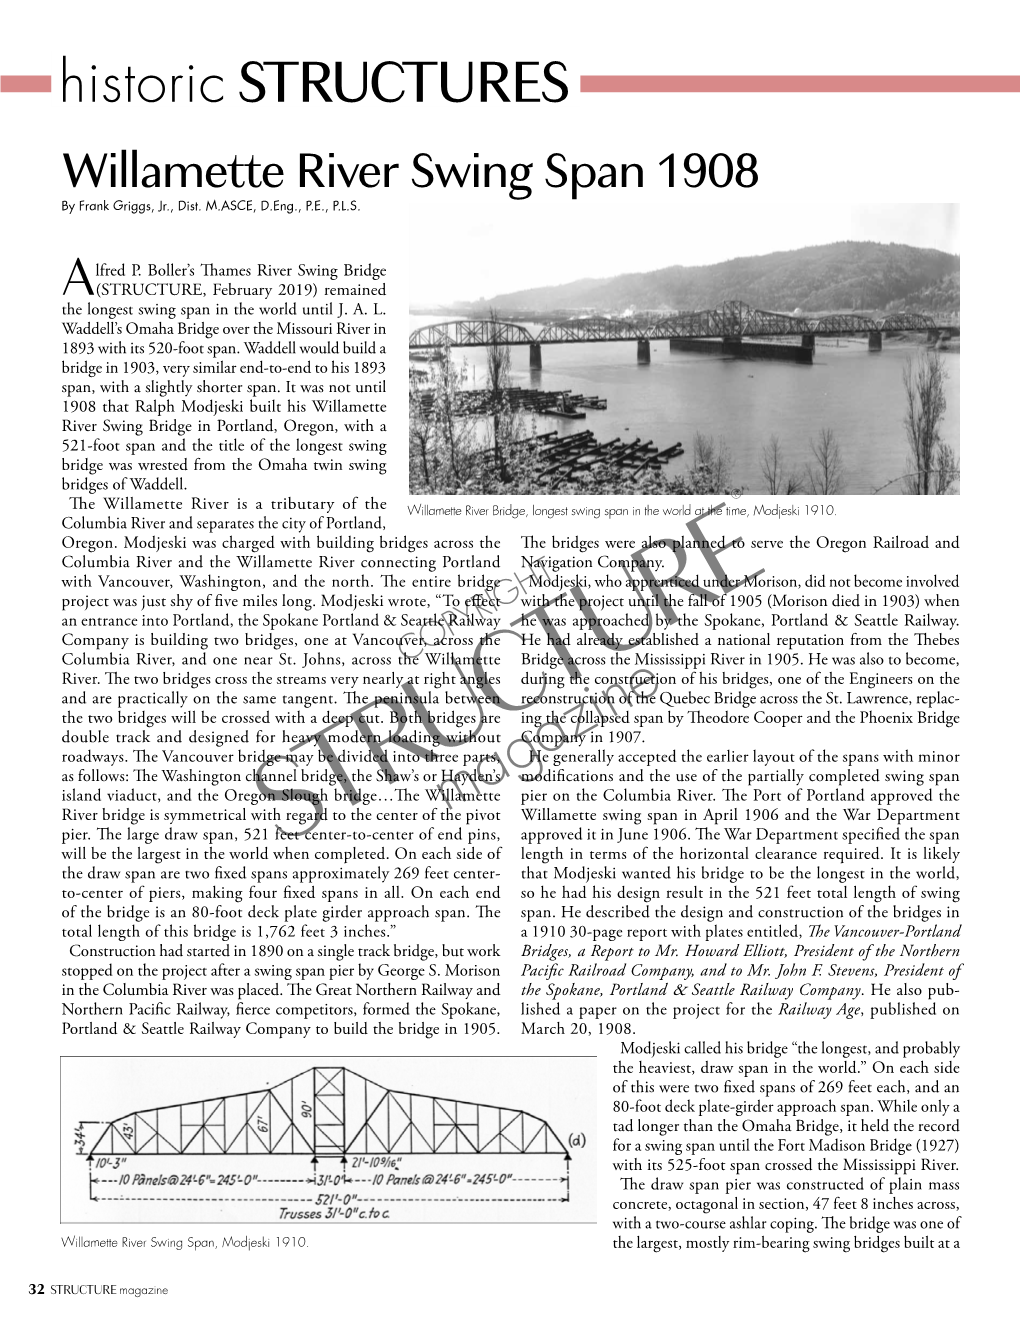 Historic STRUCTURES Willamette River Swing Span 1908 by Frank Griggs, Jr., Dist